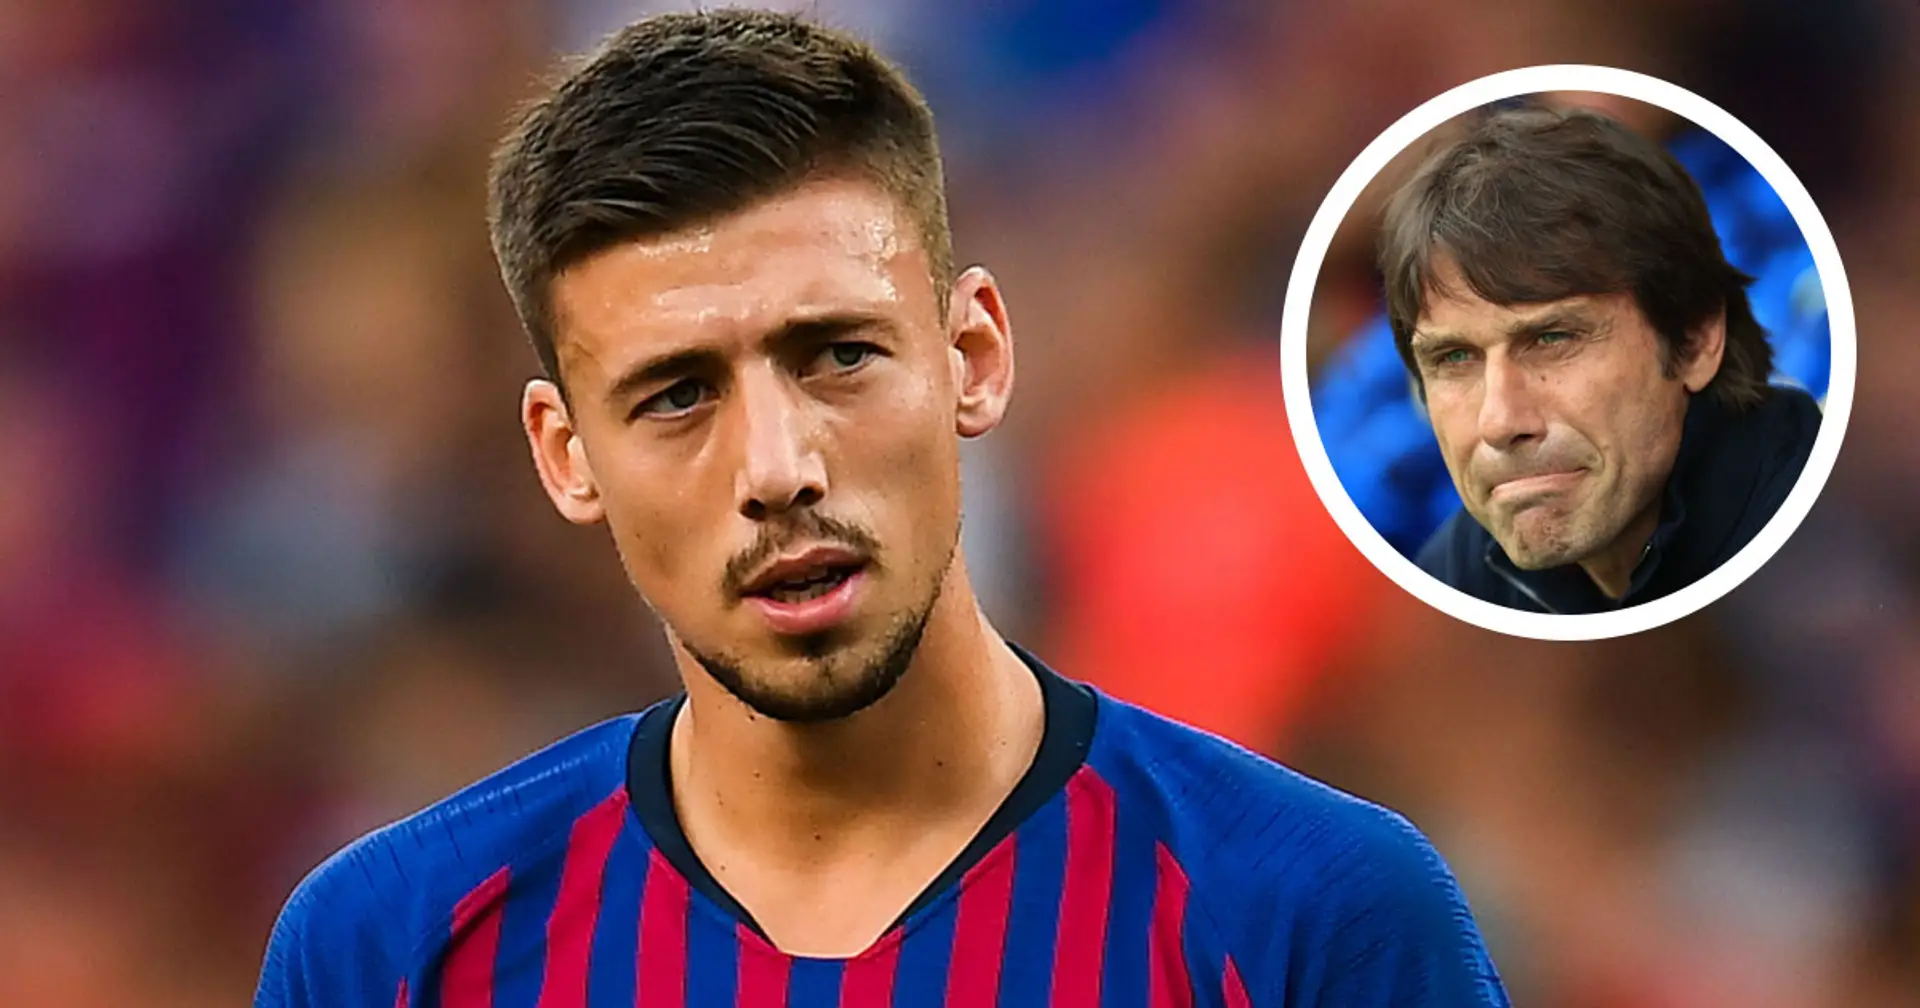 Clement Lenglet close to securing loan move to Tottenham Hotspur